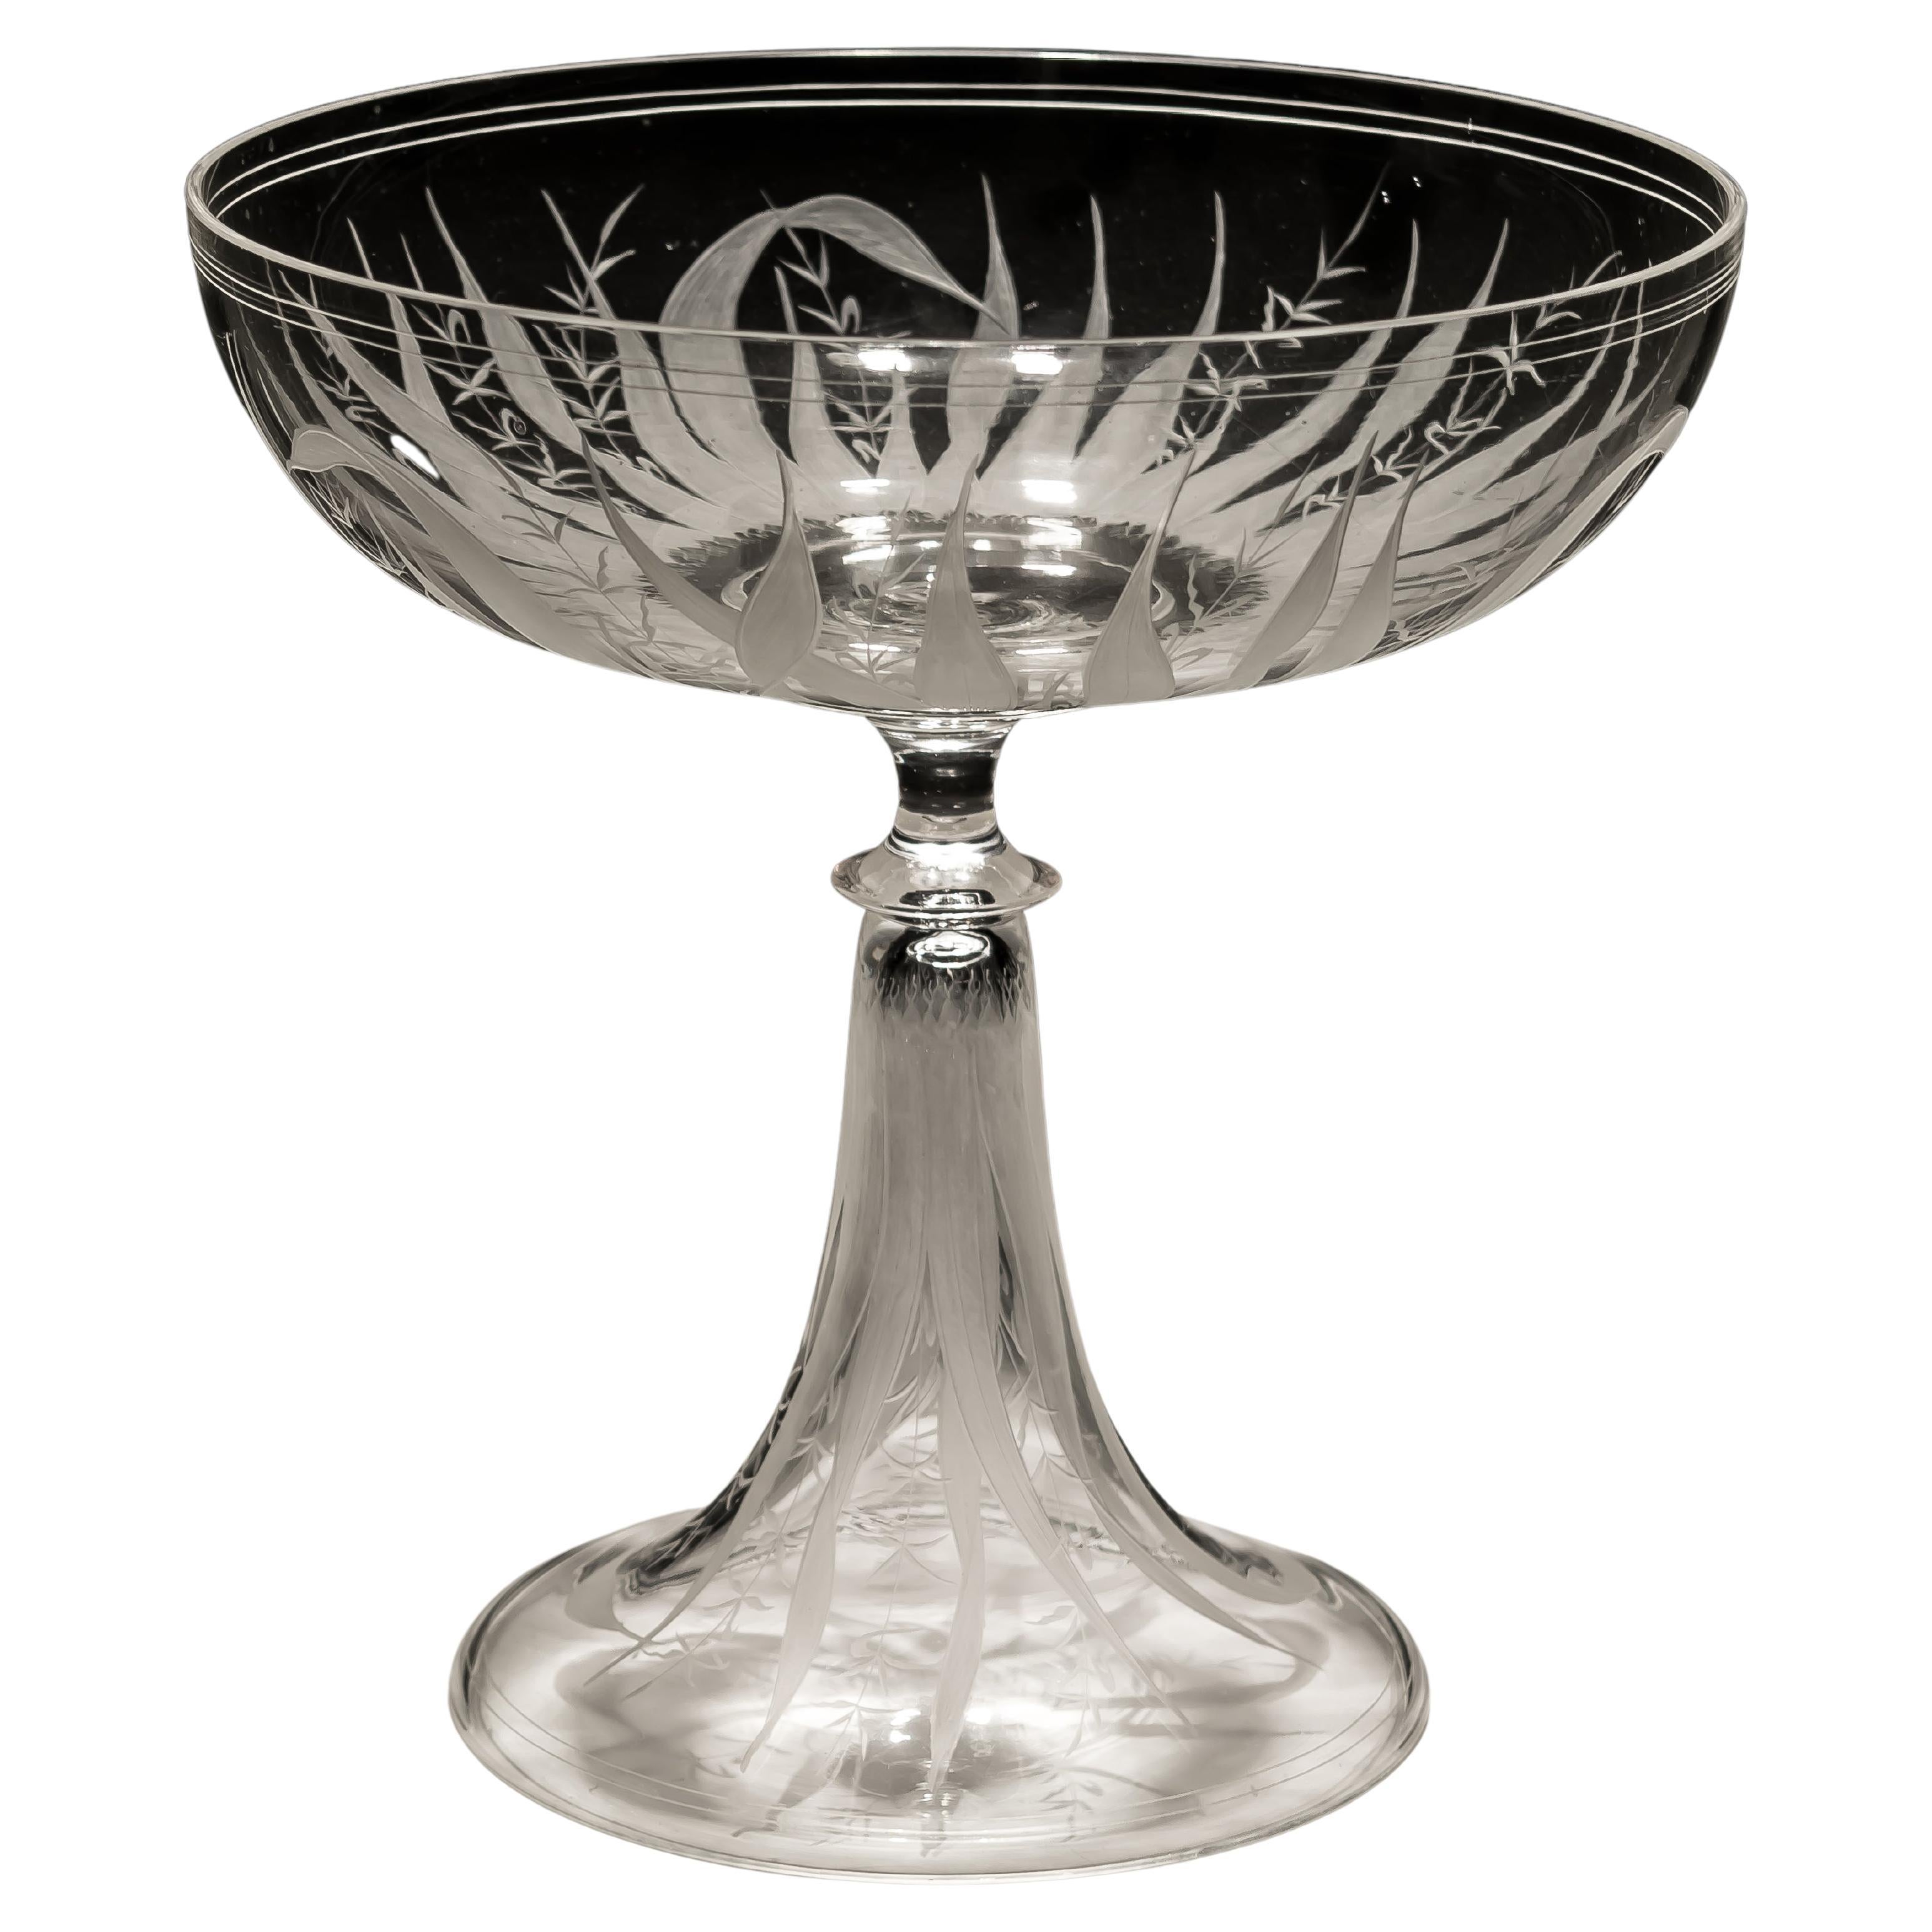 Fineley Engraved Victorian Tazza For Sale